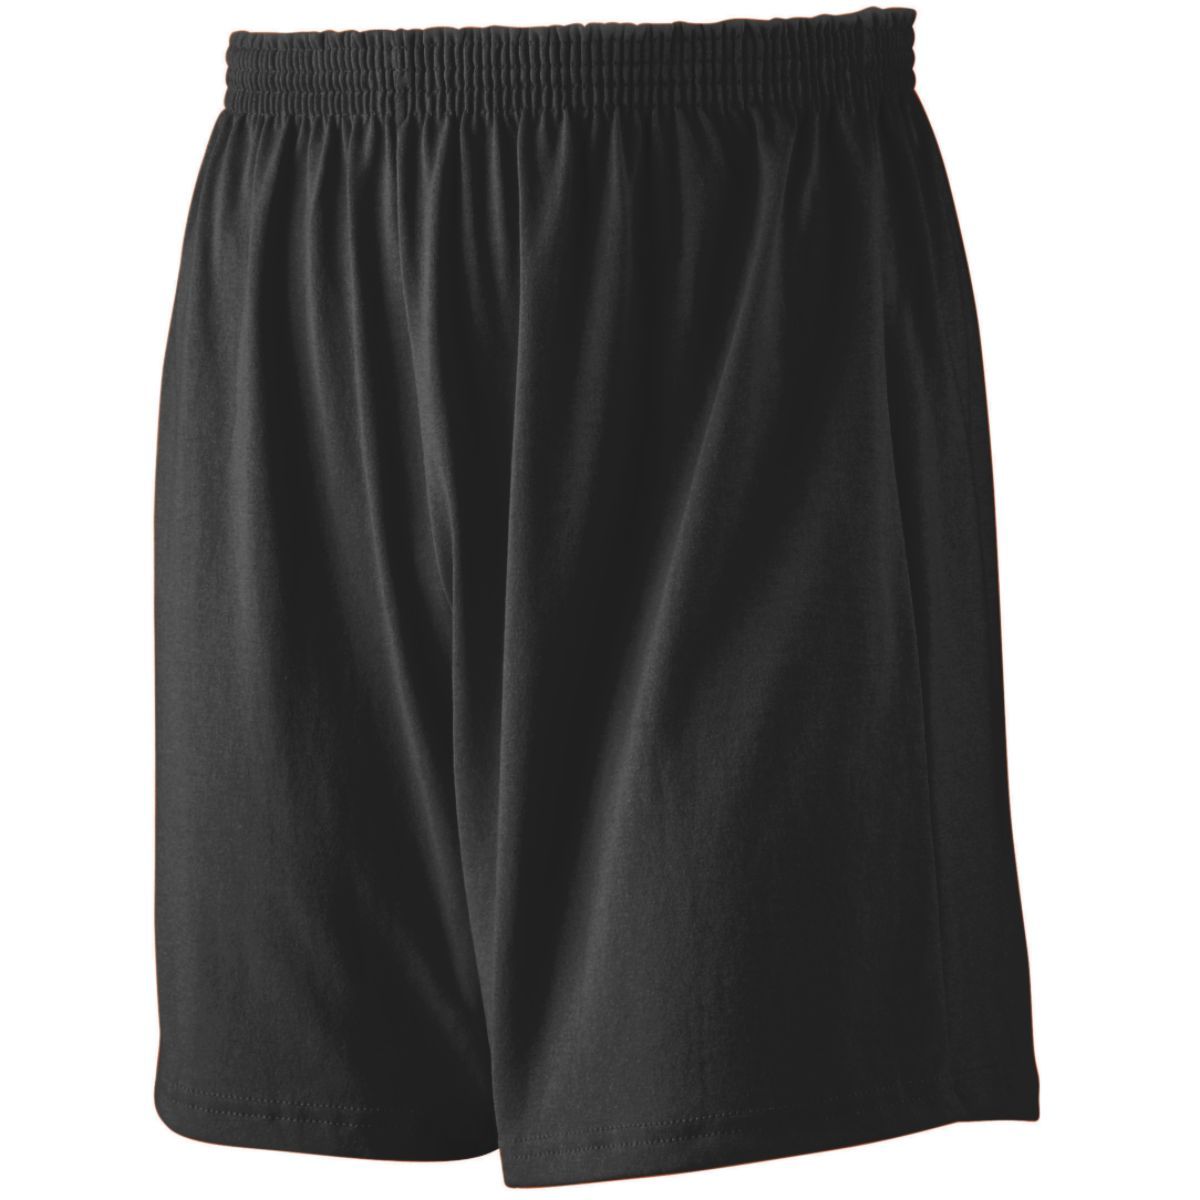 Augusta Sportswear Jersey Knit Shorts in Black  -Part of the Adult, Adult-Shorts, Augusta-Products product lines at KanaleyCreations.com